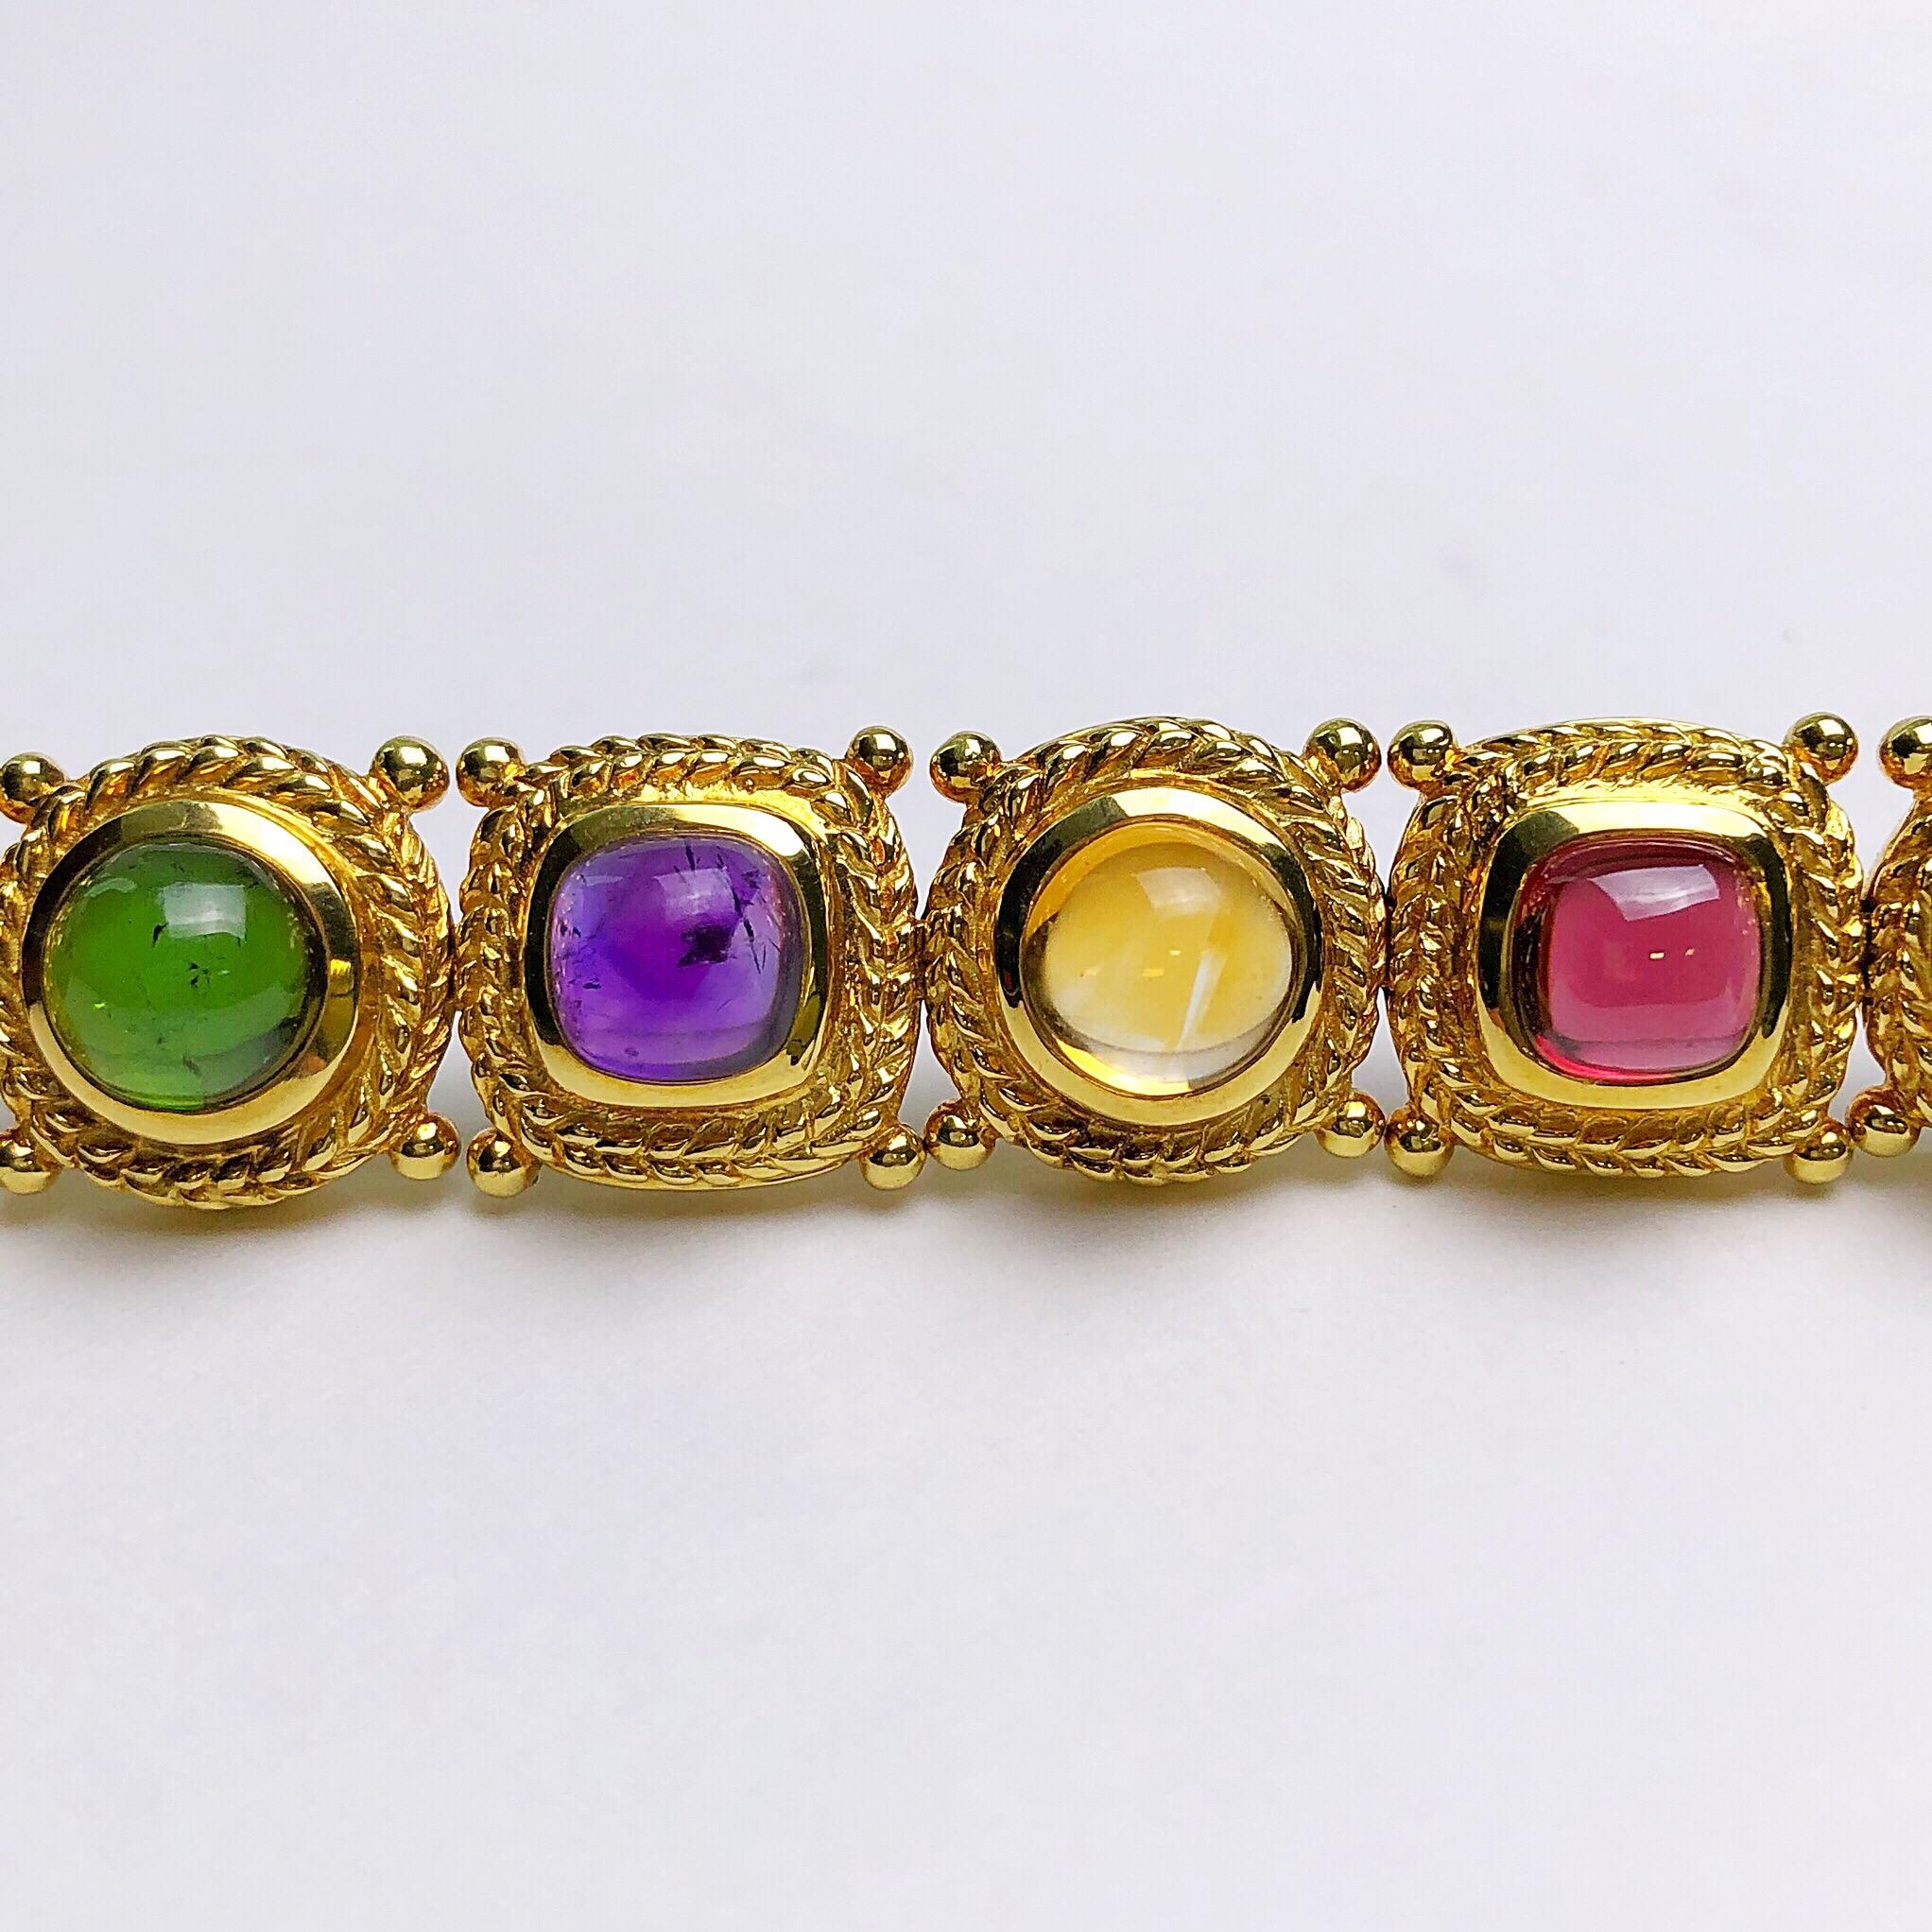 Alternating round and cushion shape semi precious cabochon gemstones are set in 18kt yellow gold with a rope detail effect. Each stone is set in its own section which have been linked together making the bracelet semi-flexible. 
The 10 stones